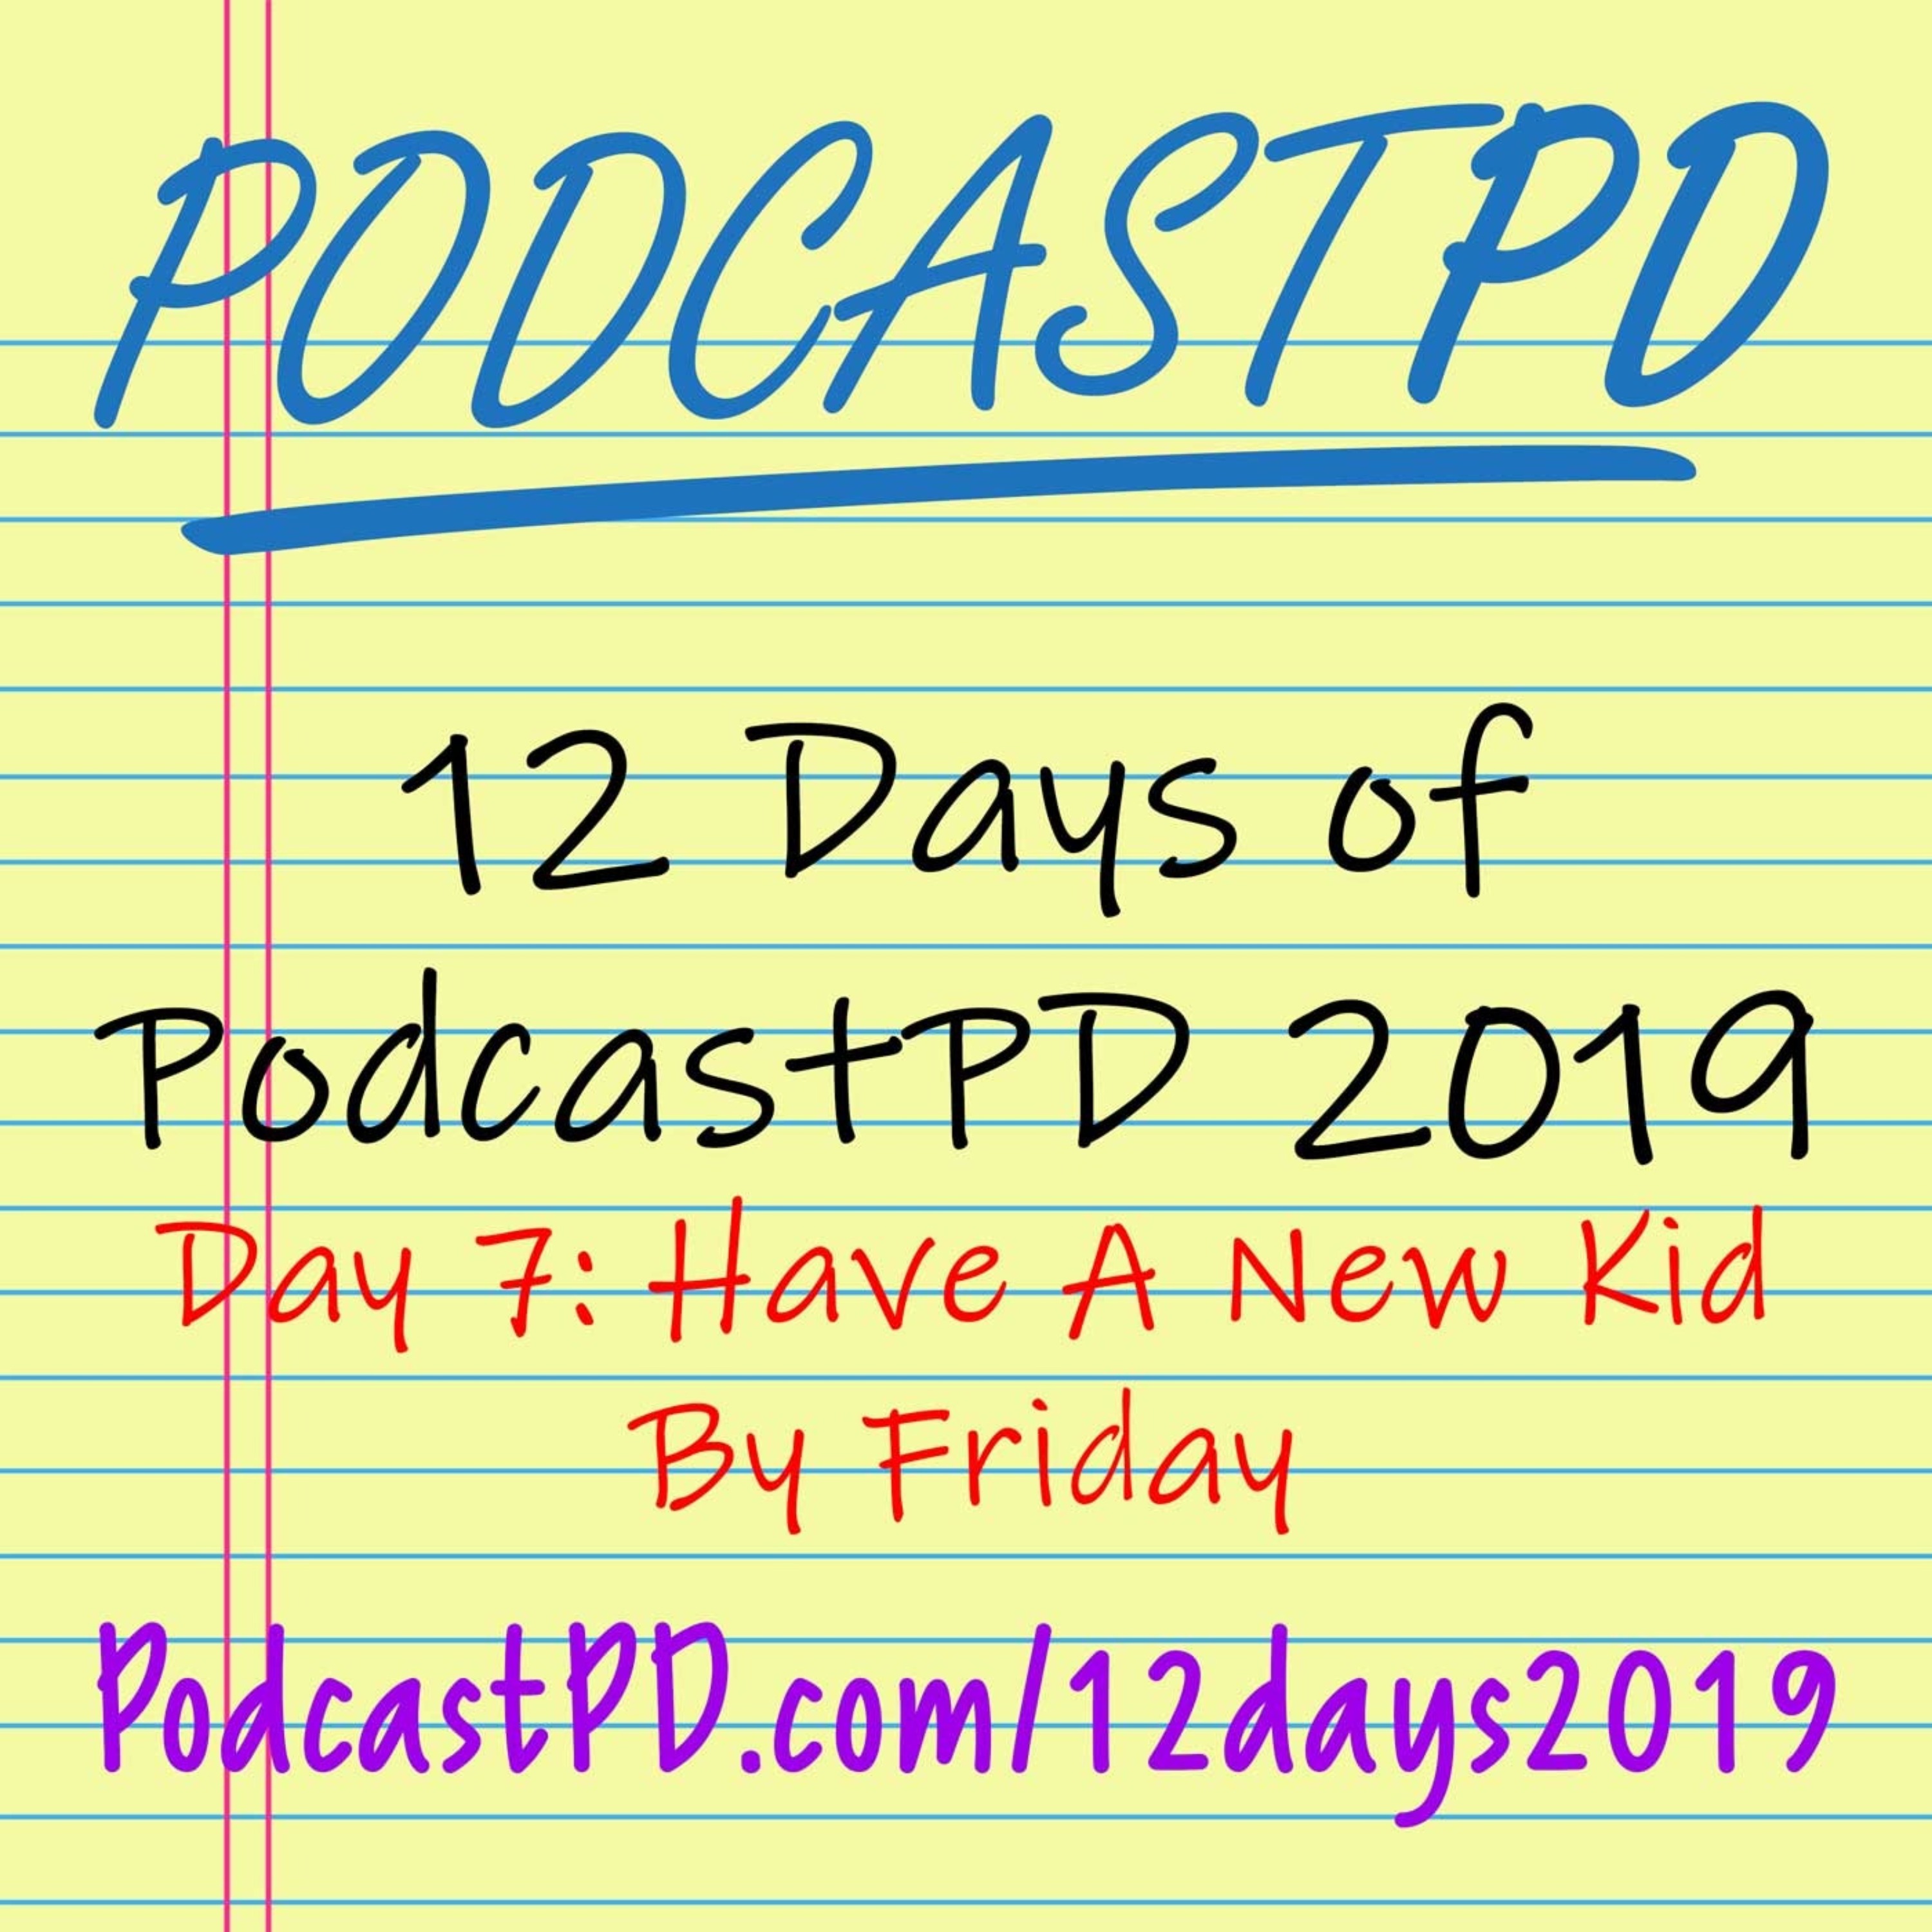 Have a New Kid by Friday - 12 Days of PodcastPD 2019 Image